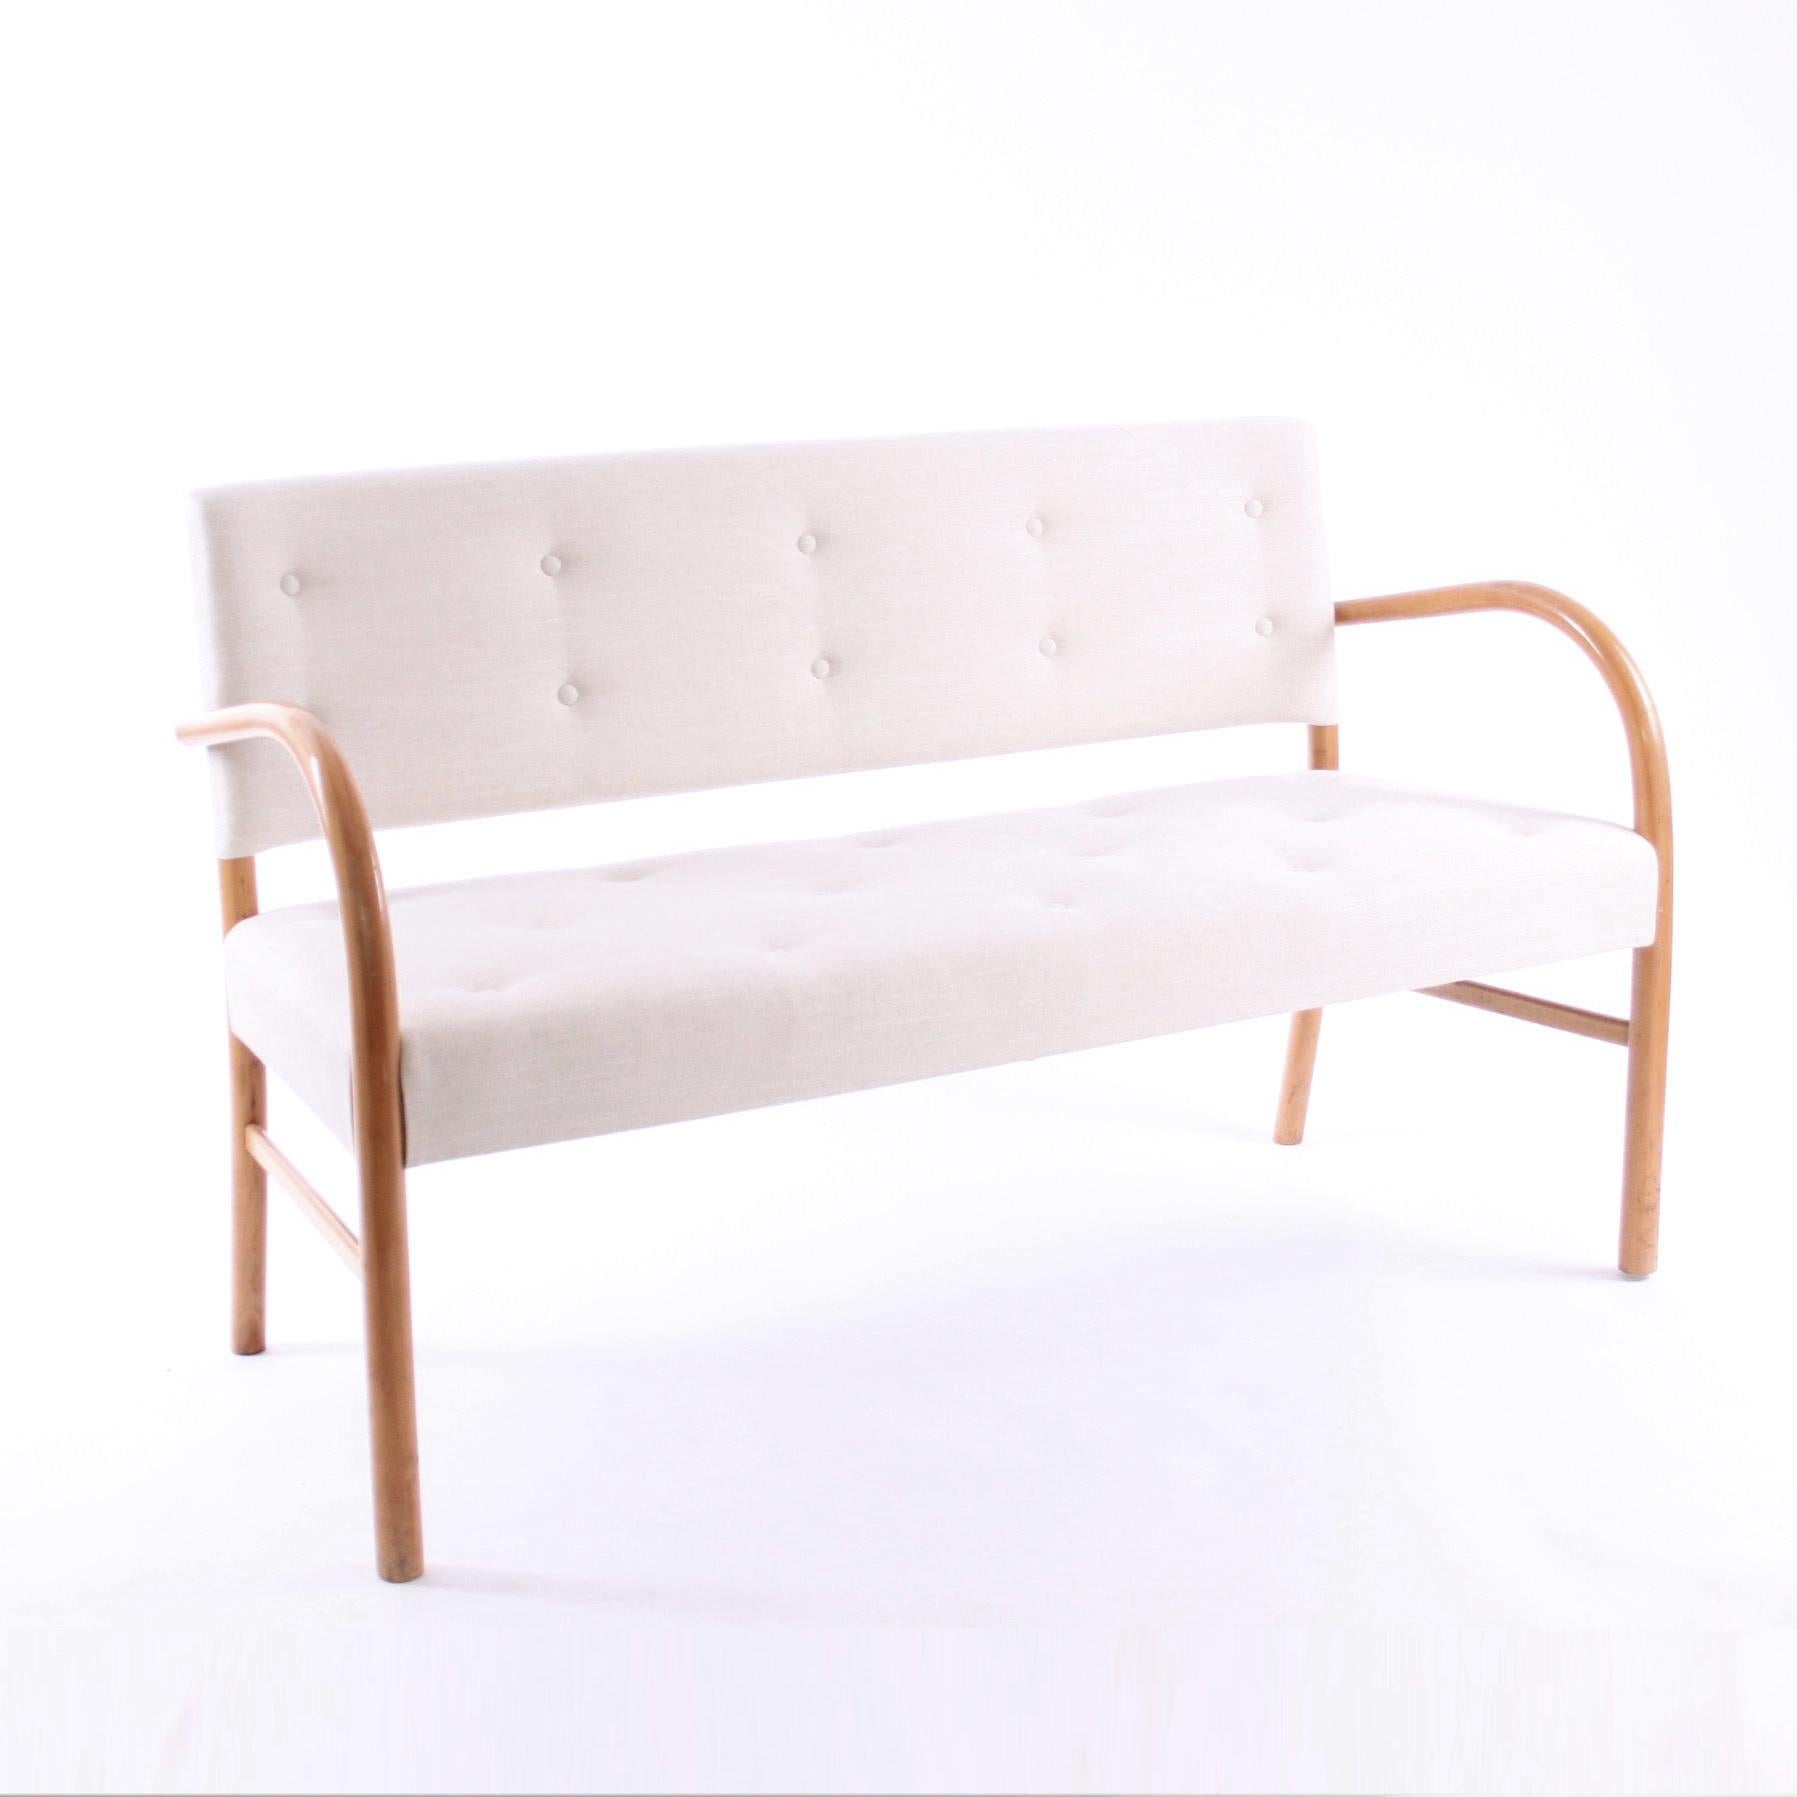 FRITS SCHLEGEL & FRITZ HANSEN - SCANDINAVIAN MODERN

A beautiful and rare sofa bench by Frits Schlegel and manufactured by Fritz Hansen, 1940, with maker's brass plaque and paper label.

The sofa bench is with moulded beech frame and seat and back